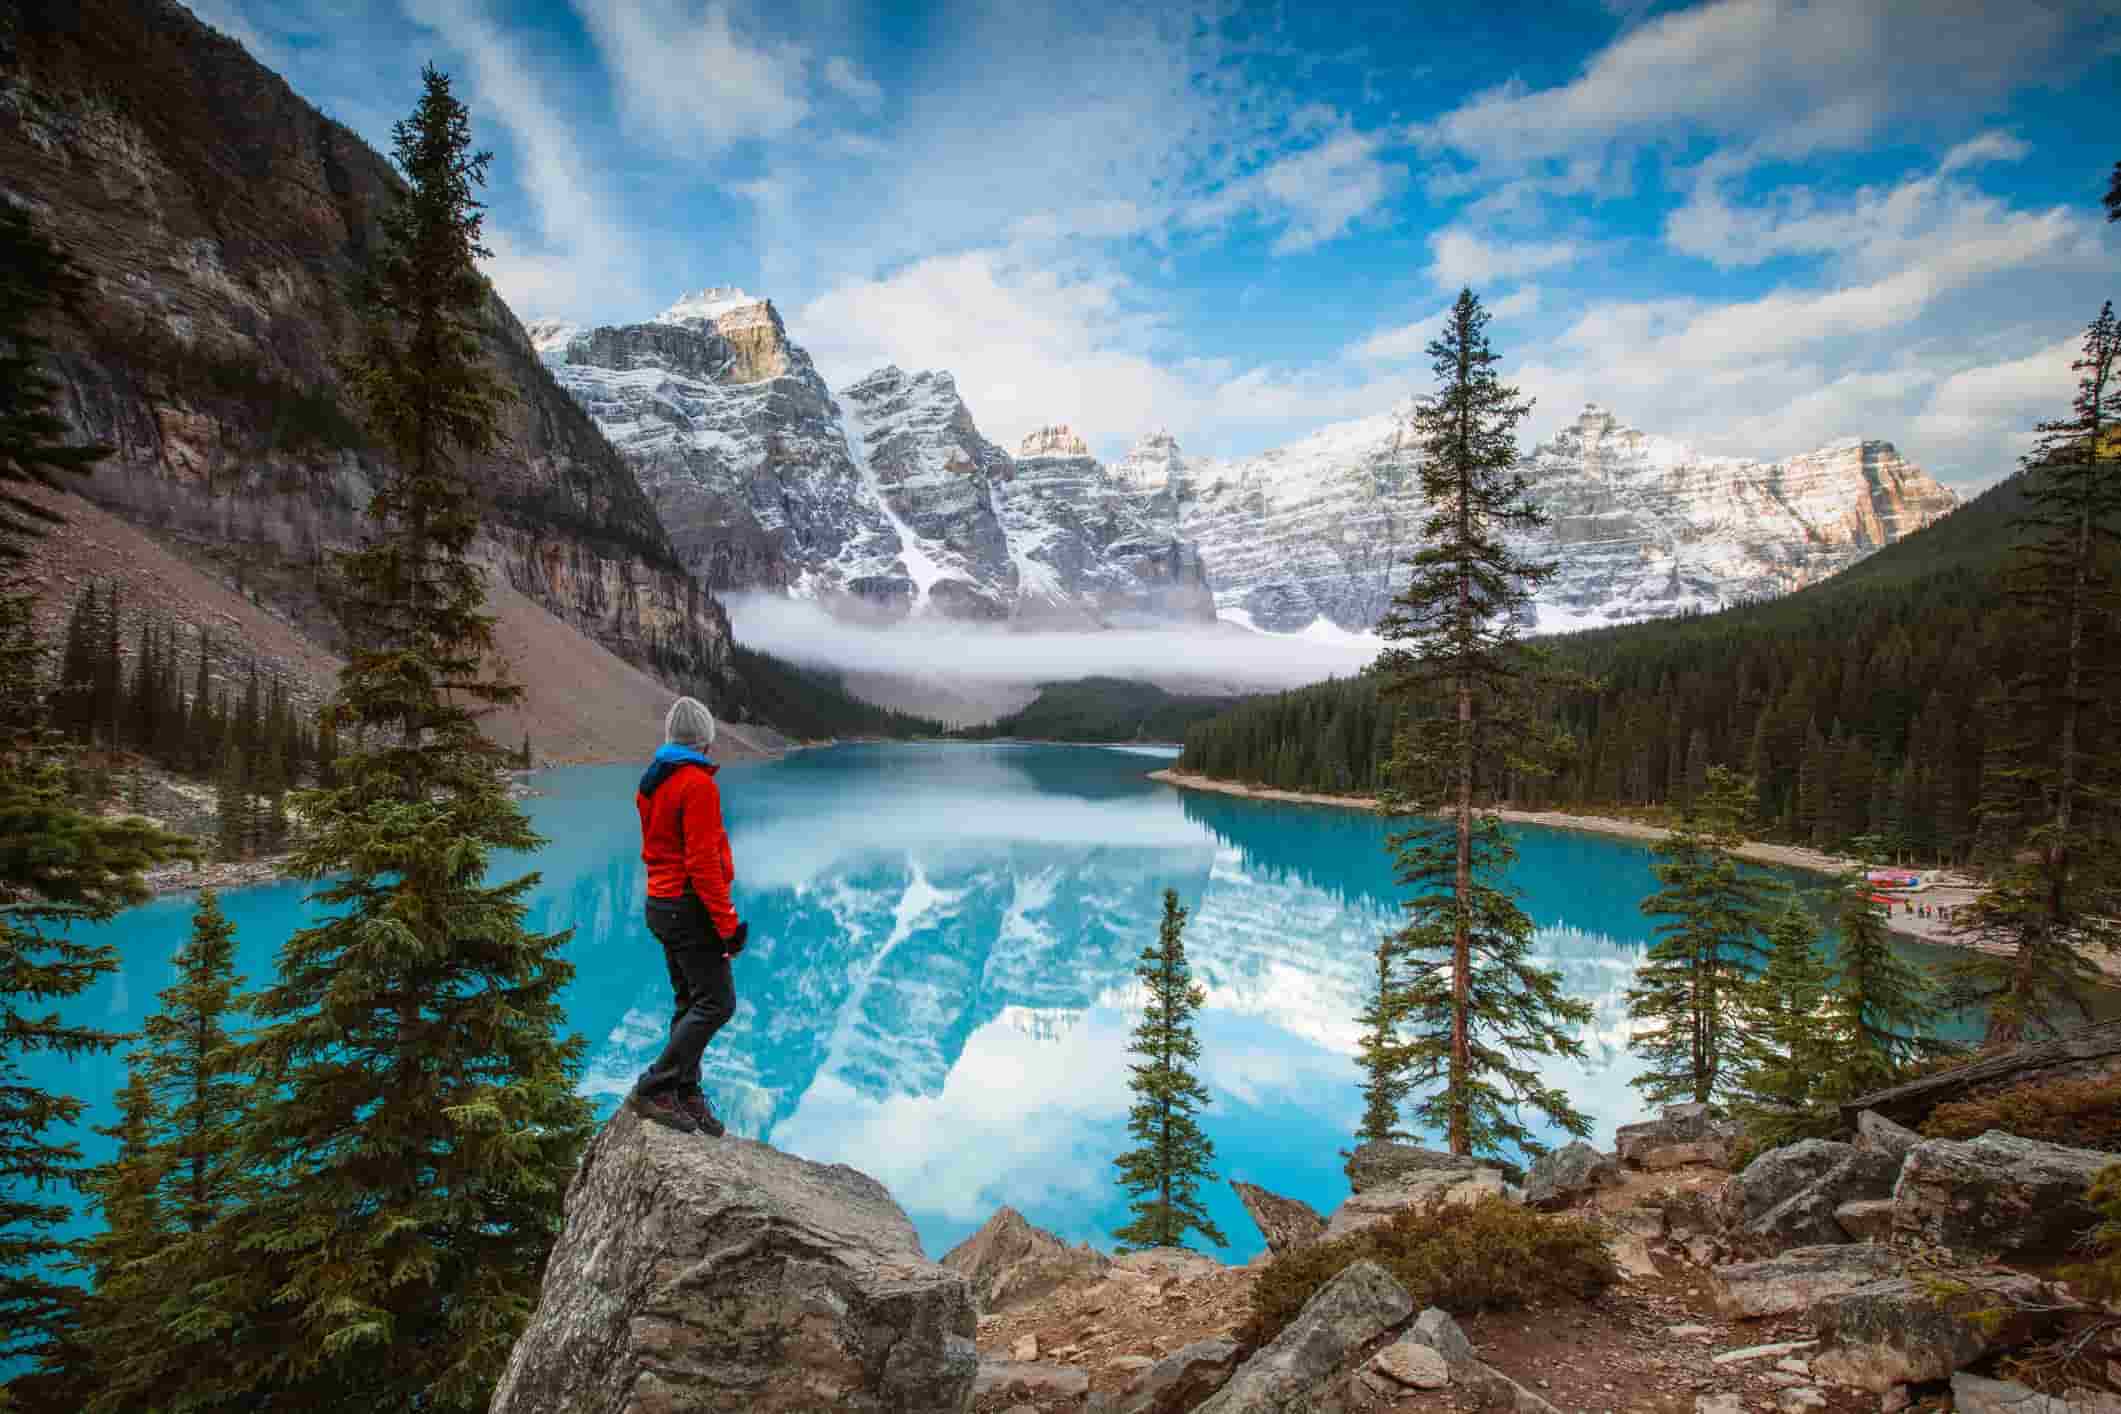 Nonresident in Canada looking at a lake